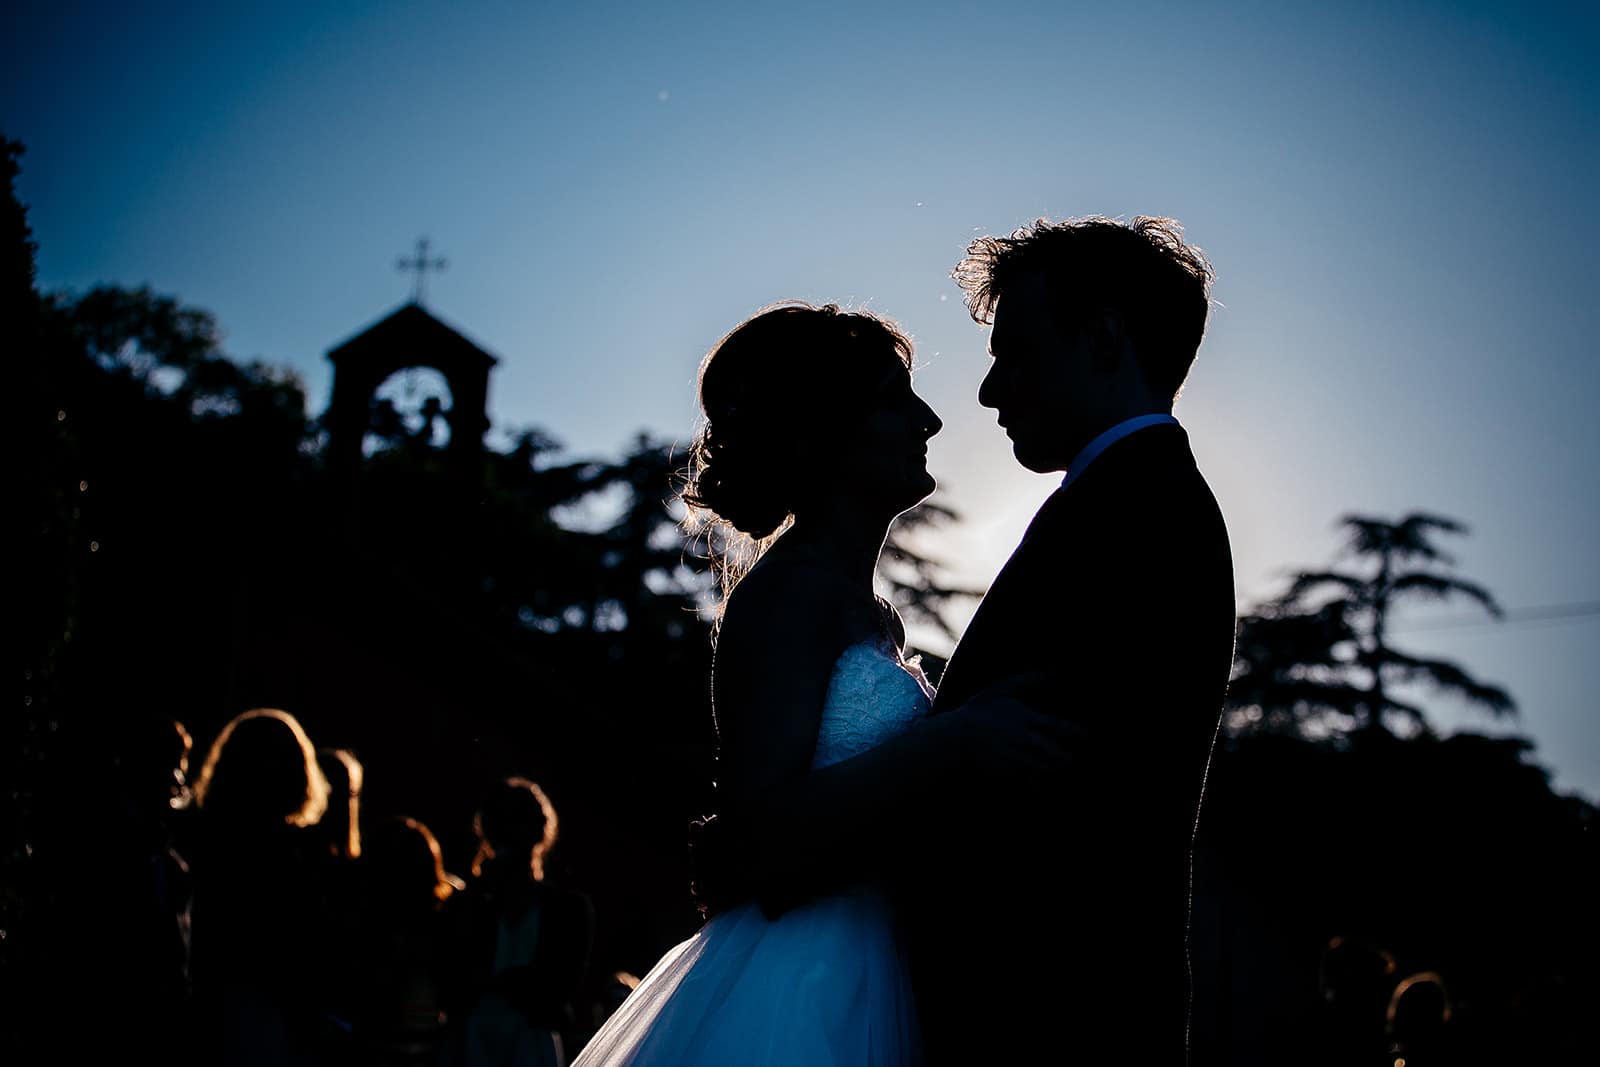  How to choose your wedding photographer 2018 2019 Best Wedding Photographer comment choisir son photographe de mariage 2018 2019 meilleur photographe de mariage meilleur photographe de mariage Lyon Photographe mariage Lyon Photographe reportage mariage Lyon